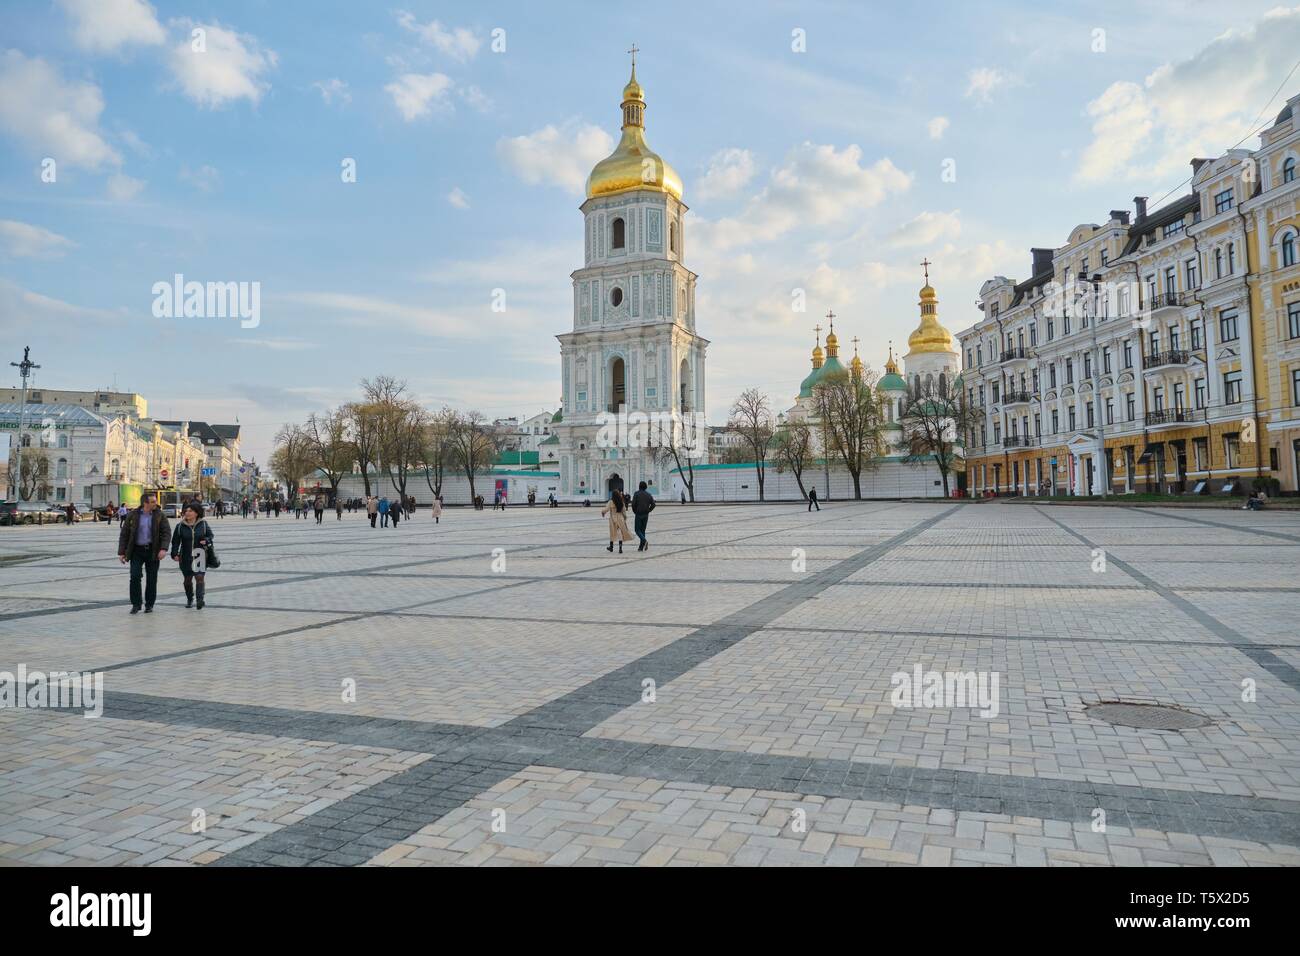 Kyiv UA, 17-04-2019. Historical and tourist center of Kyiv, St. Sophia Square, St. Sophia Cathedral, bell tower, unesco monument, city in spring. Stock Photo